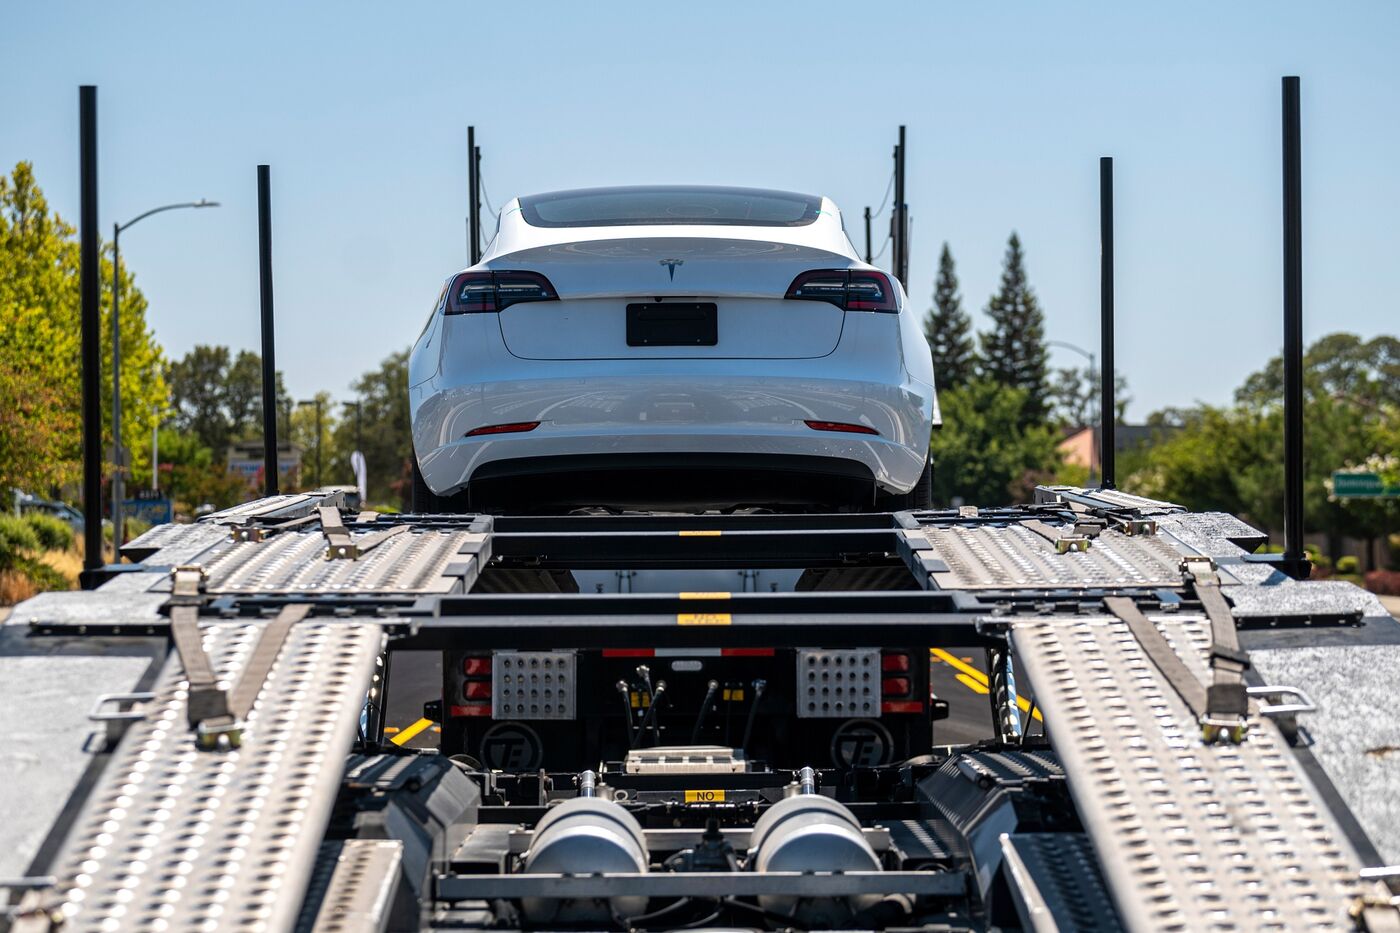 A Tesla Model 3 vehicle on an auto carrier.